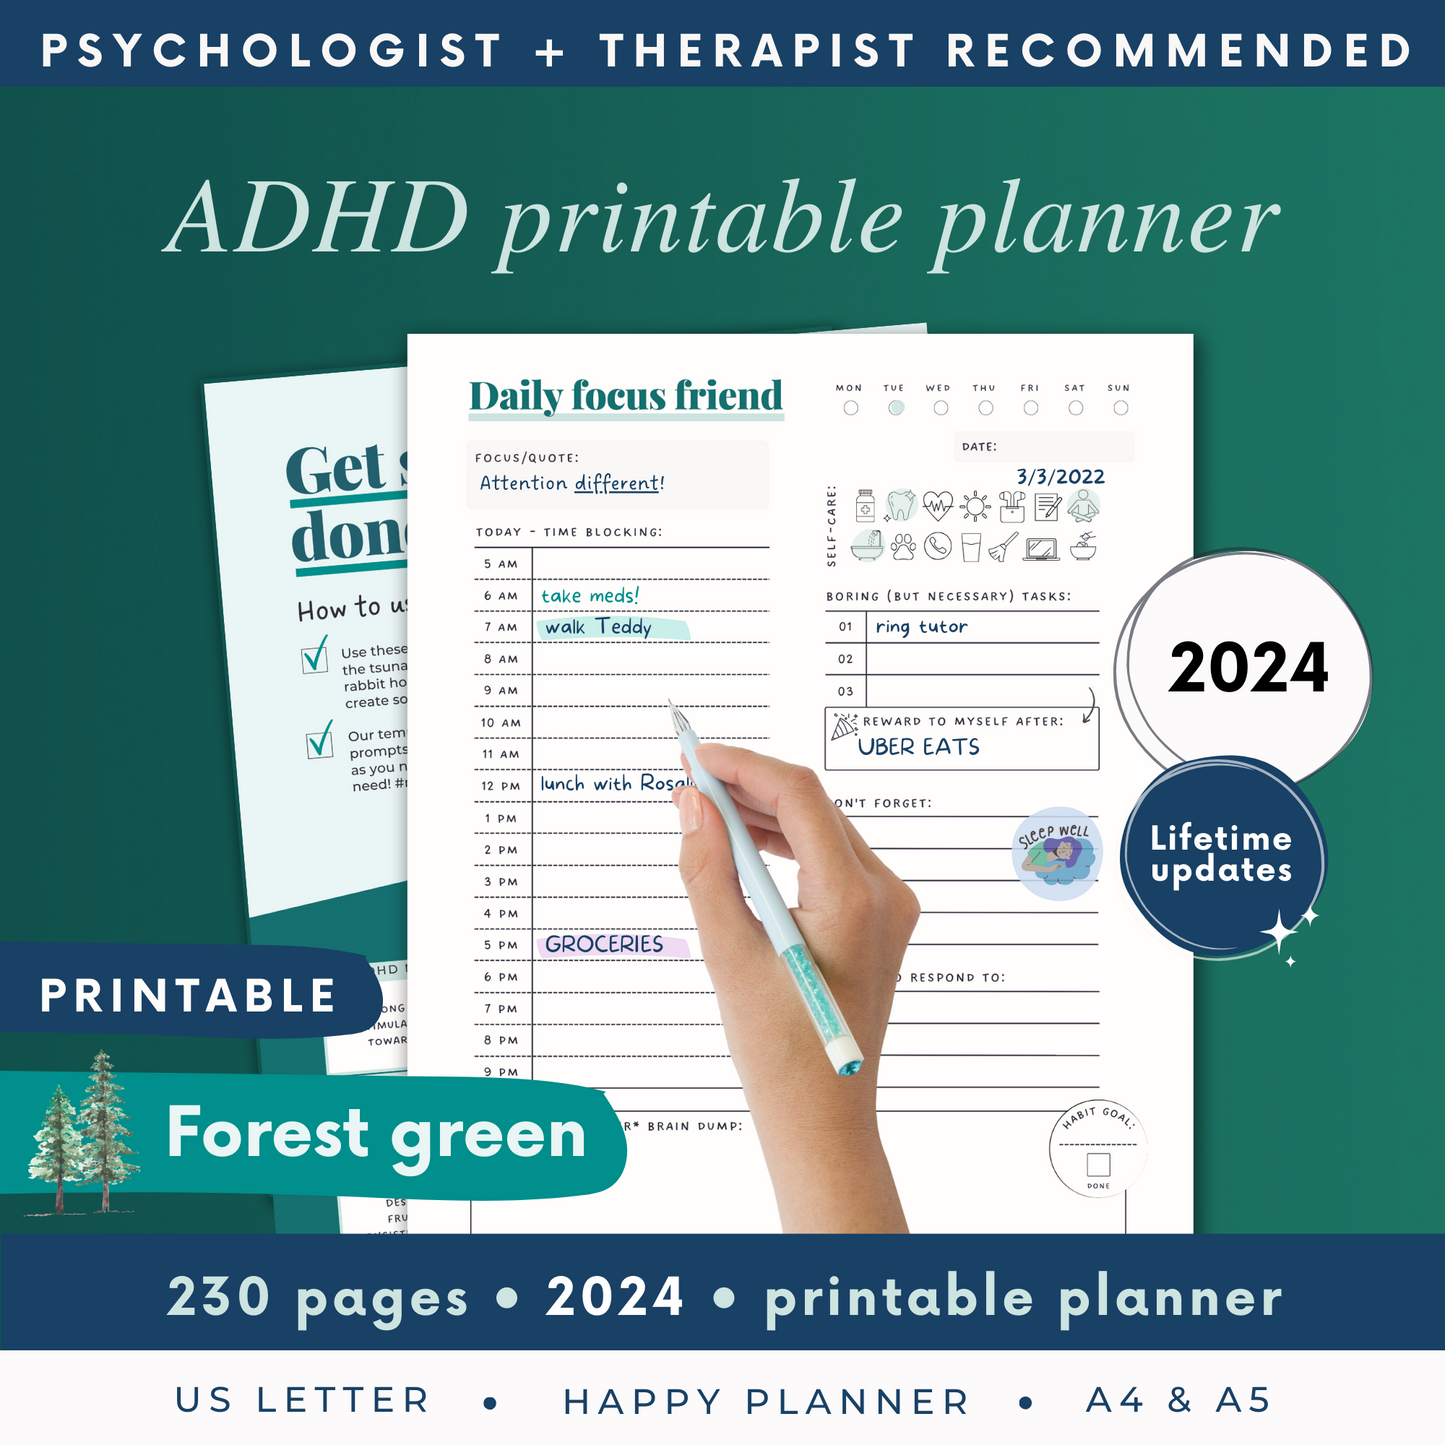 FOREST GREEN PRINTABLE - ADHD Planner, Self Care & Habits Workbook & Journal